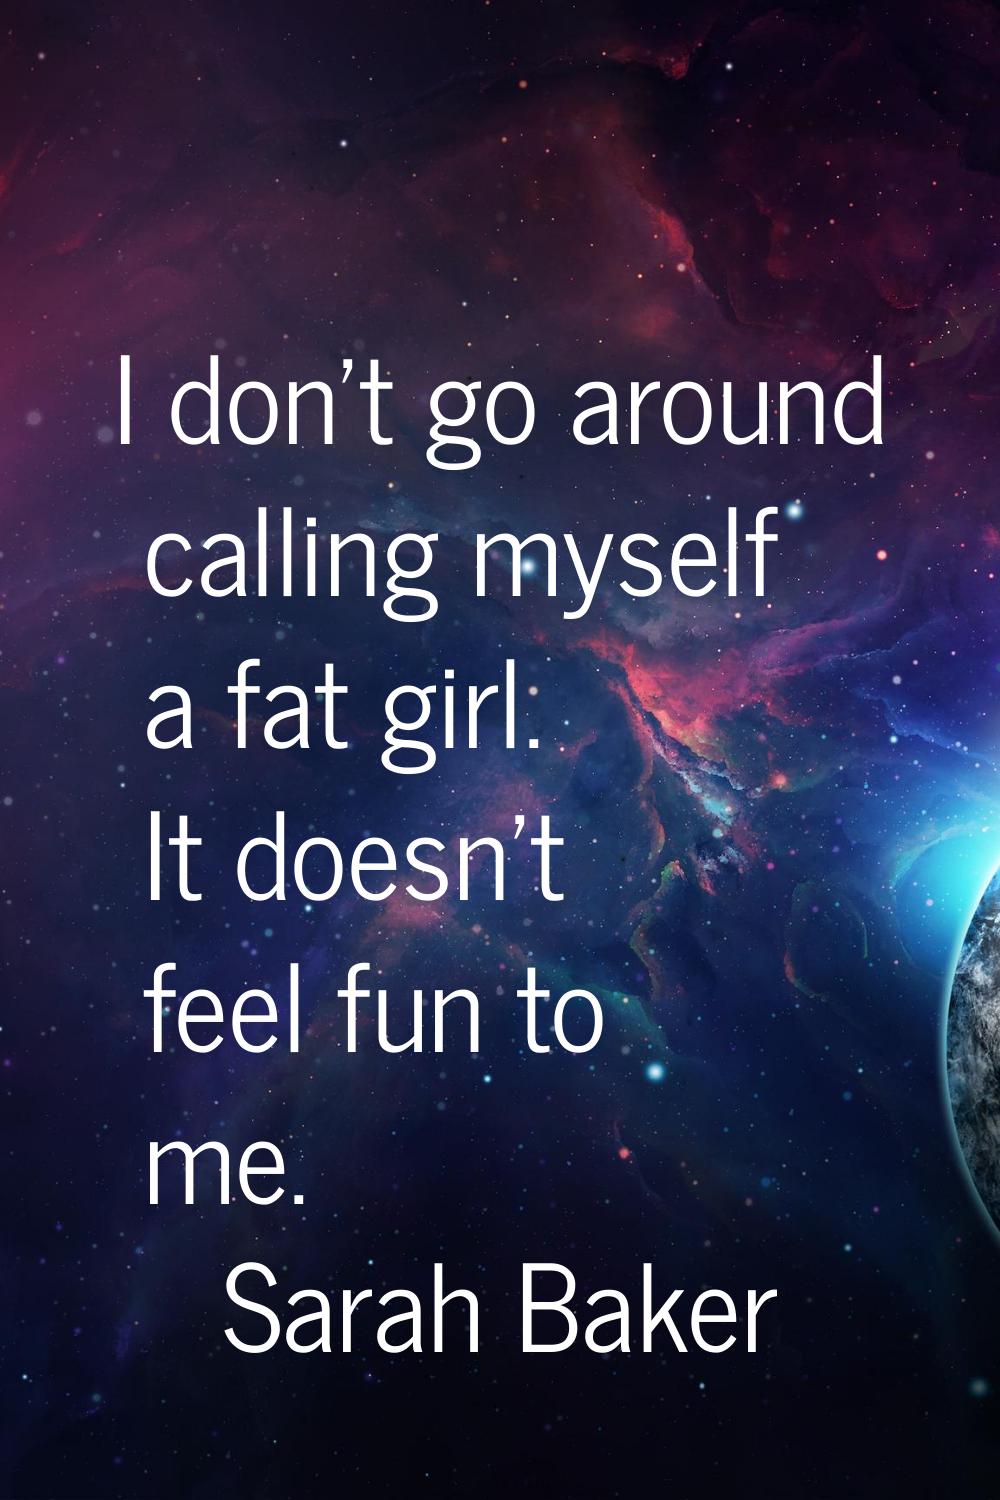 I don't go around calling myself a fat girl. It doesn't feel fun to me.